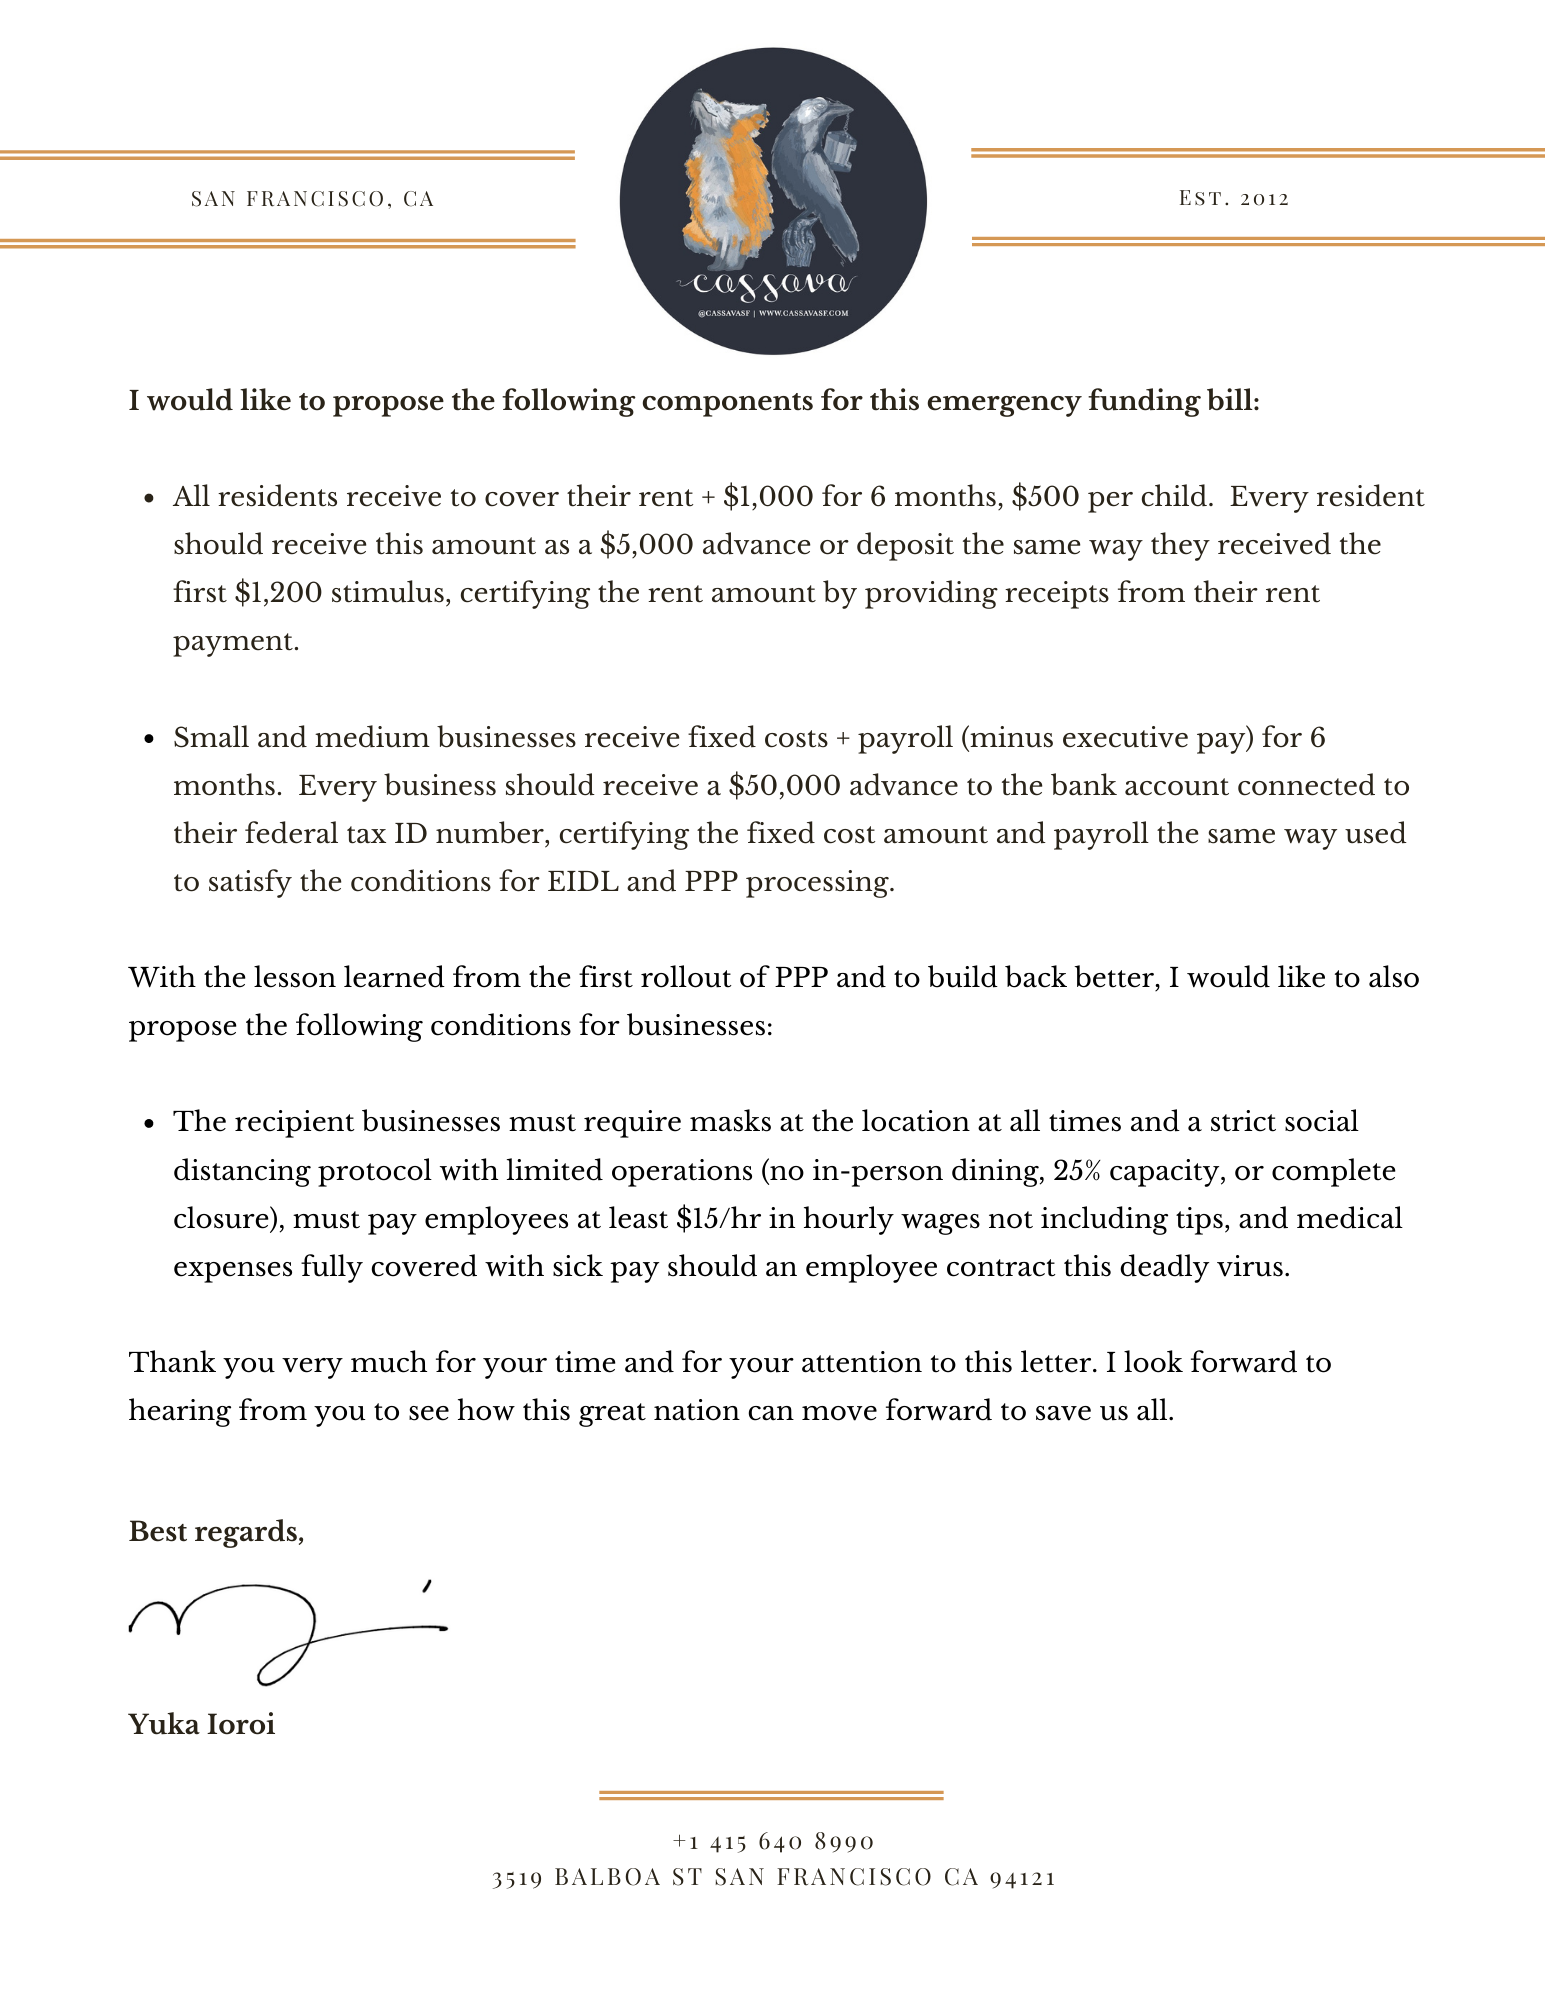 Letter to Congress 12.17.2020 (1).png